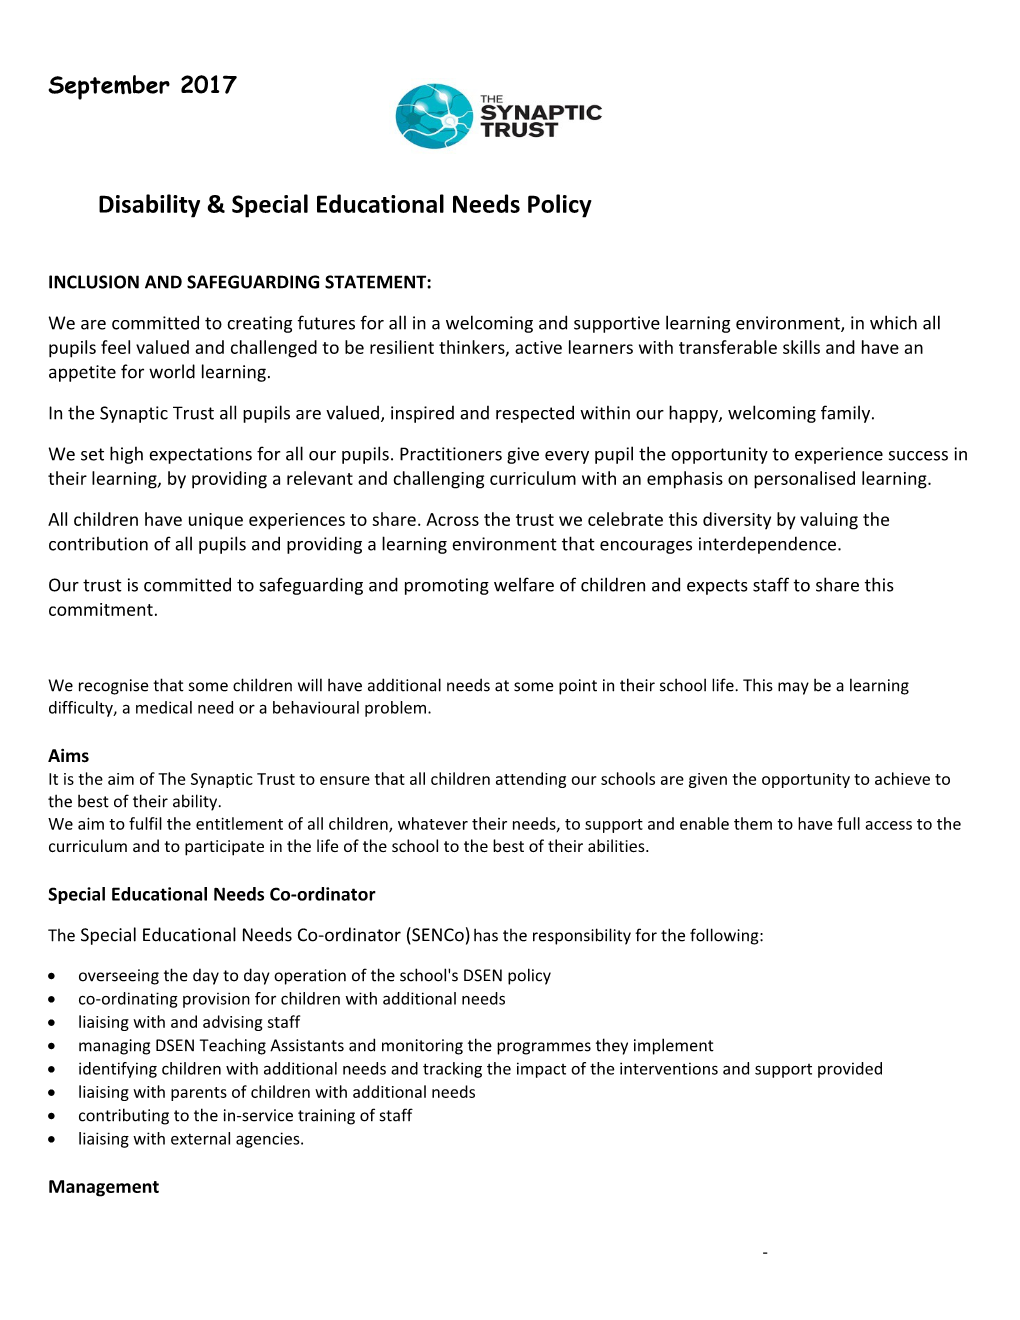 Disability & Special Educational Needs Policy